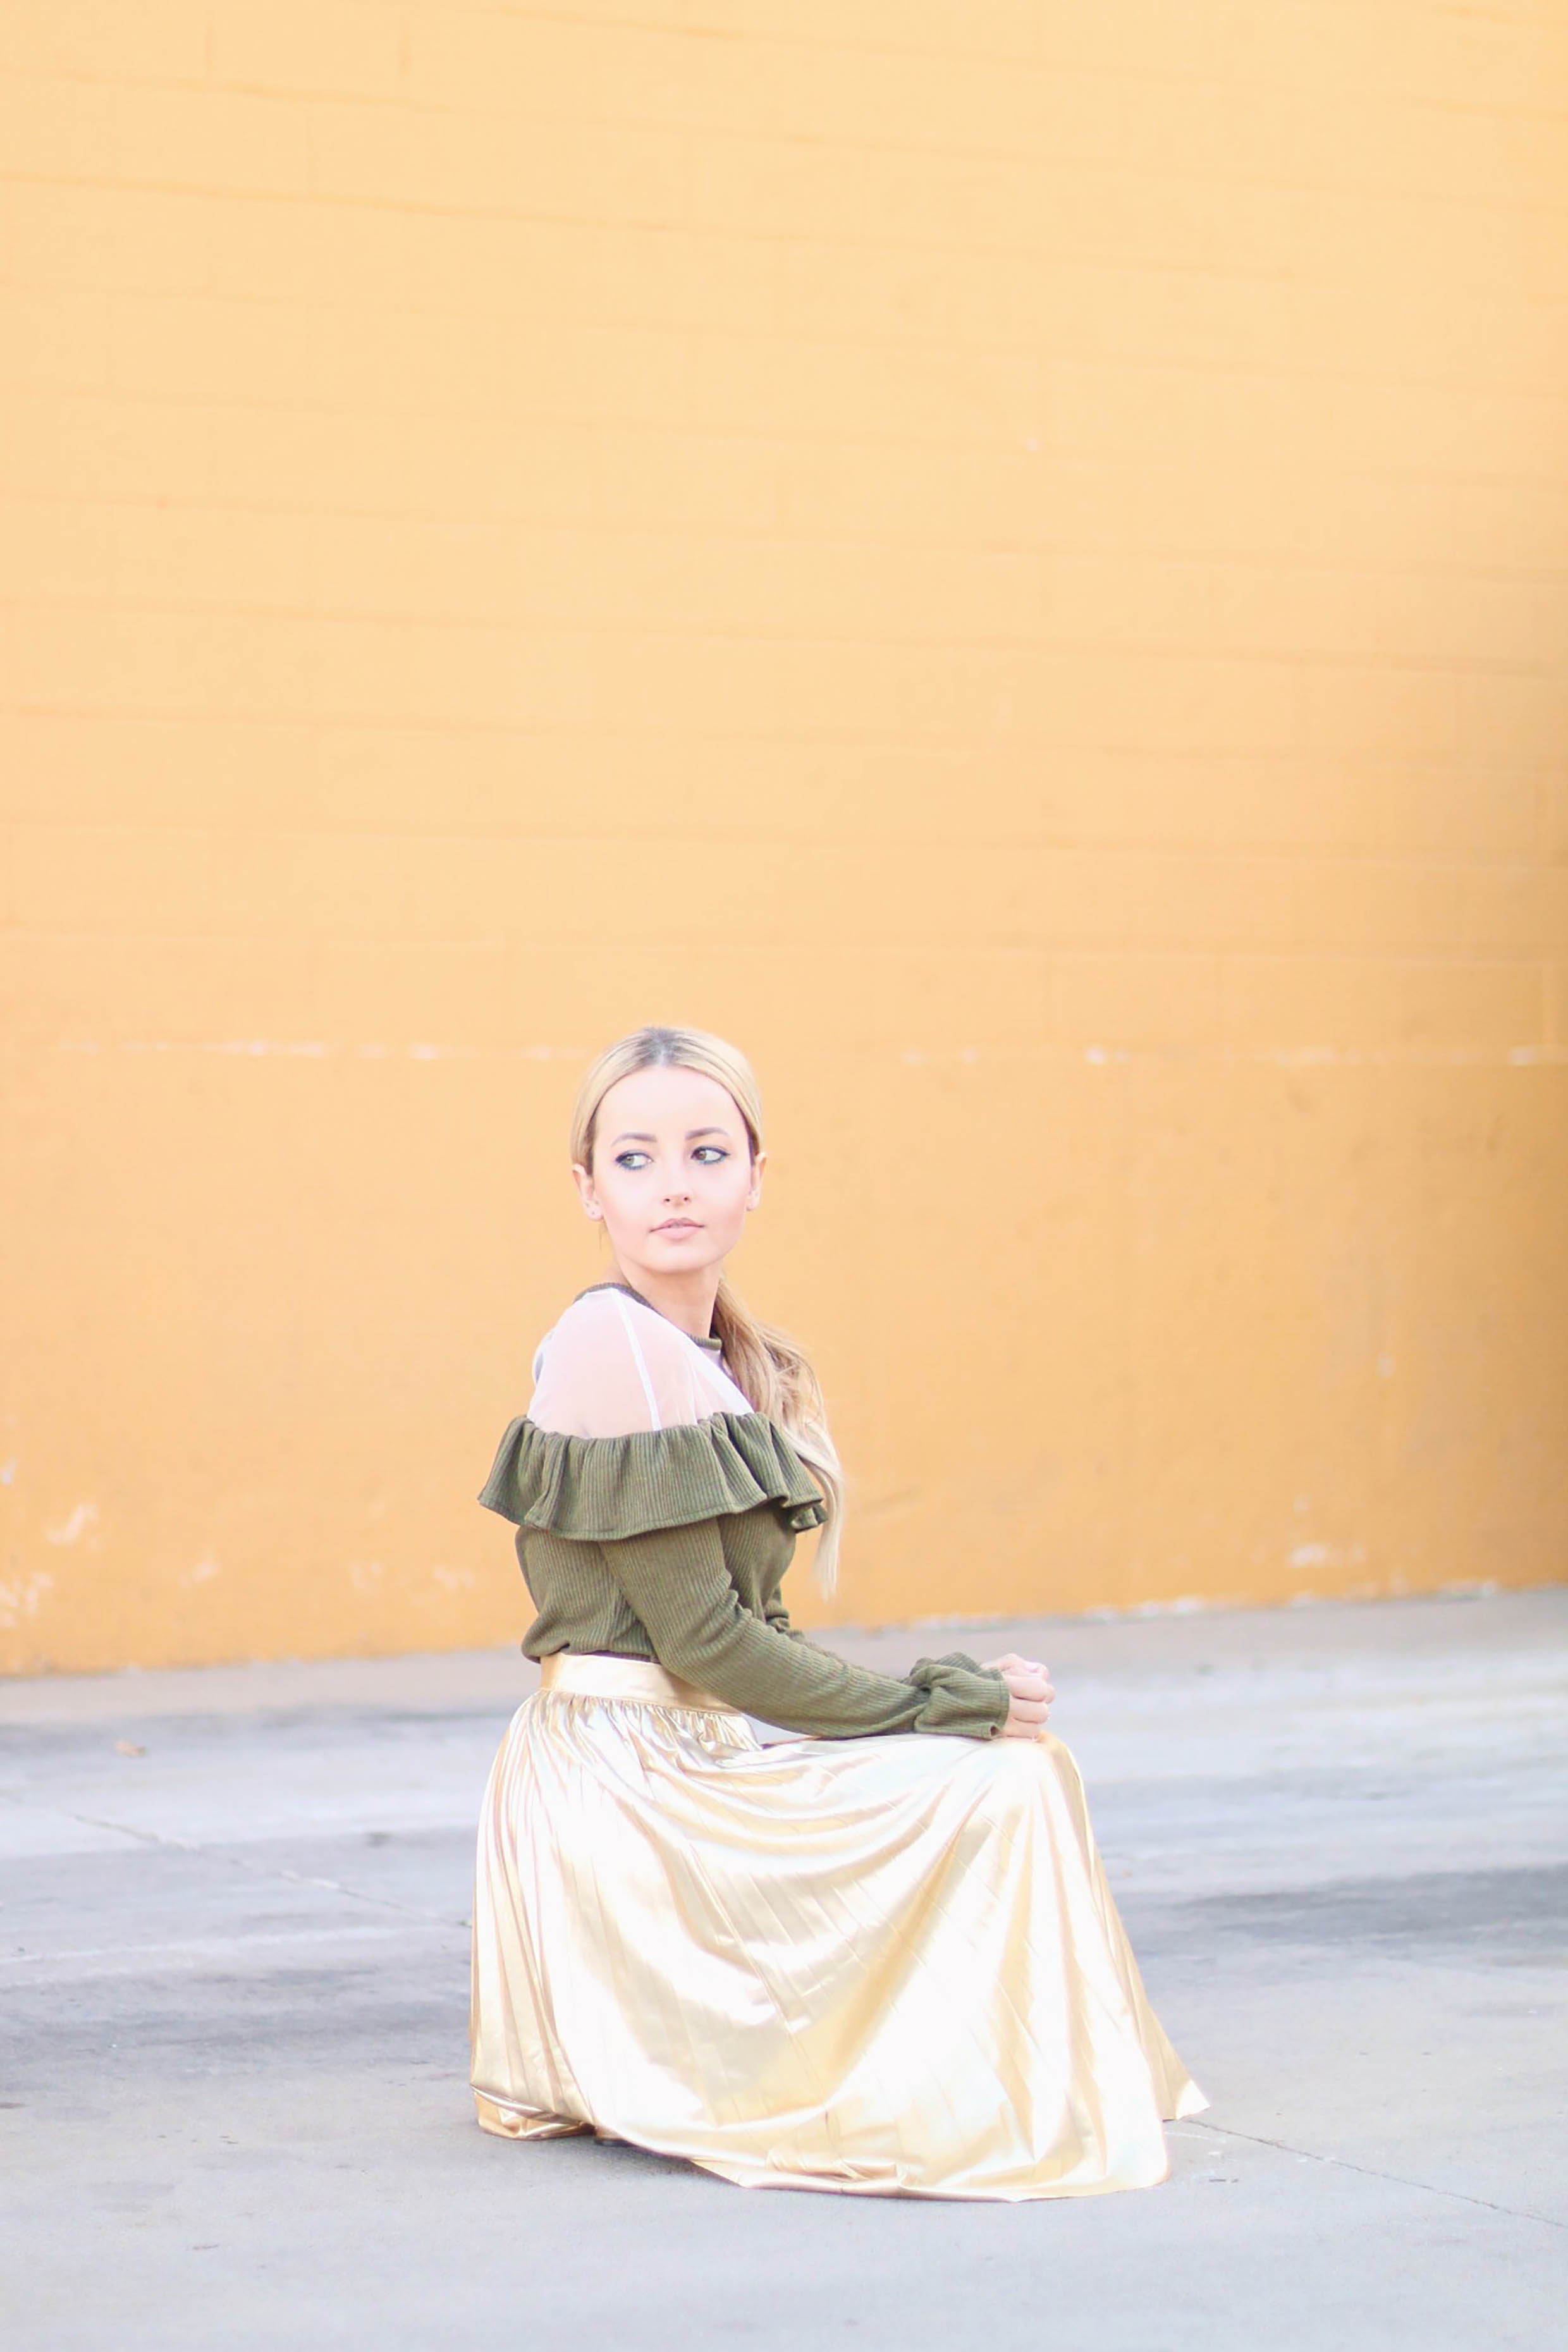 Alena Gidenko of modaprints.com Styling a gold pleated skirt for the holidays